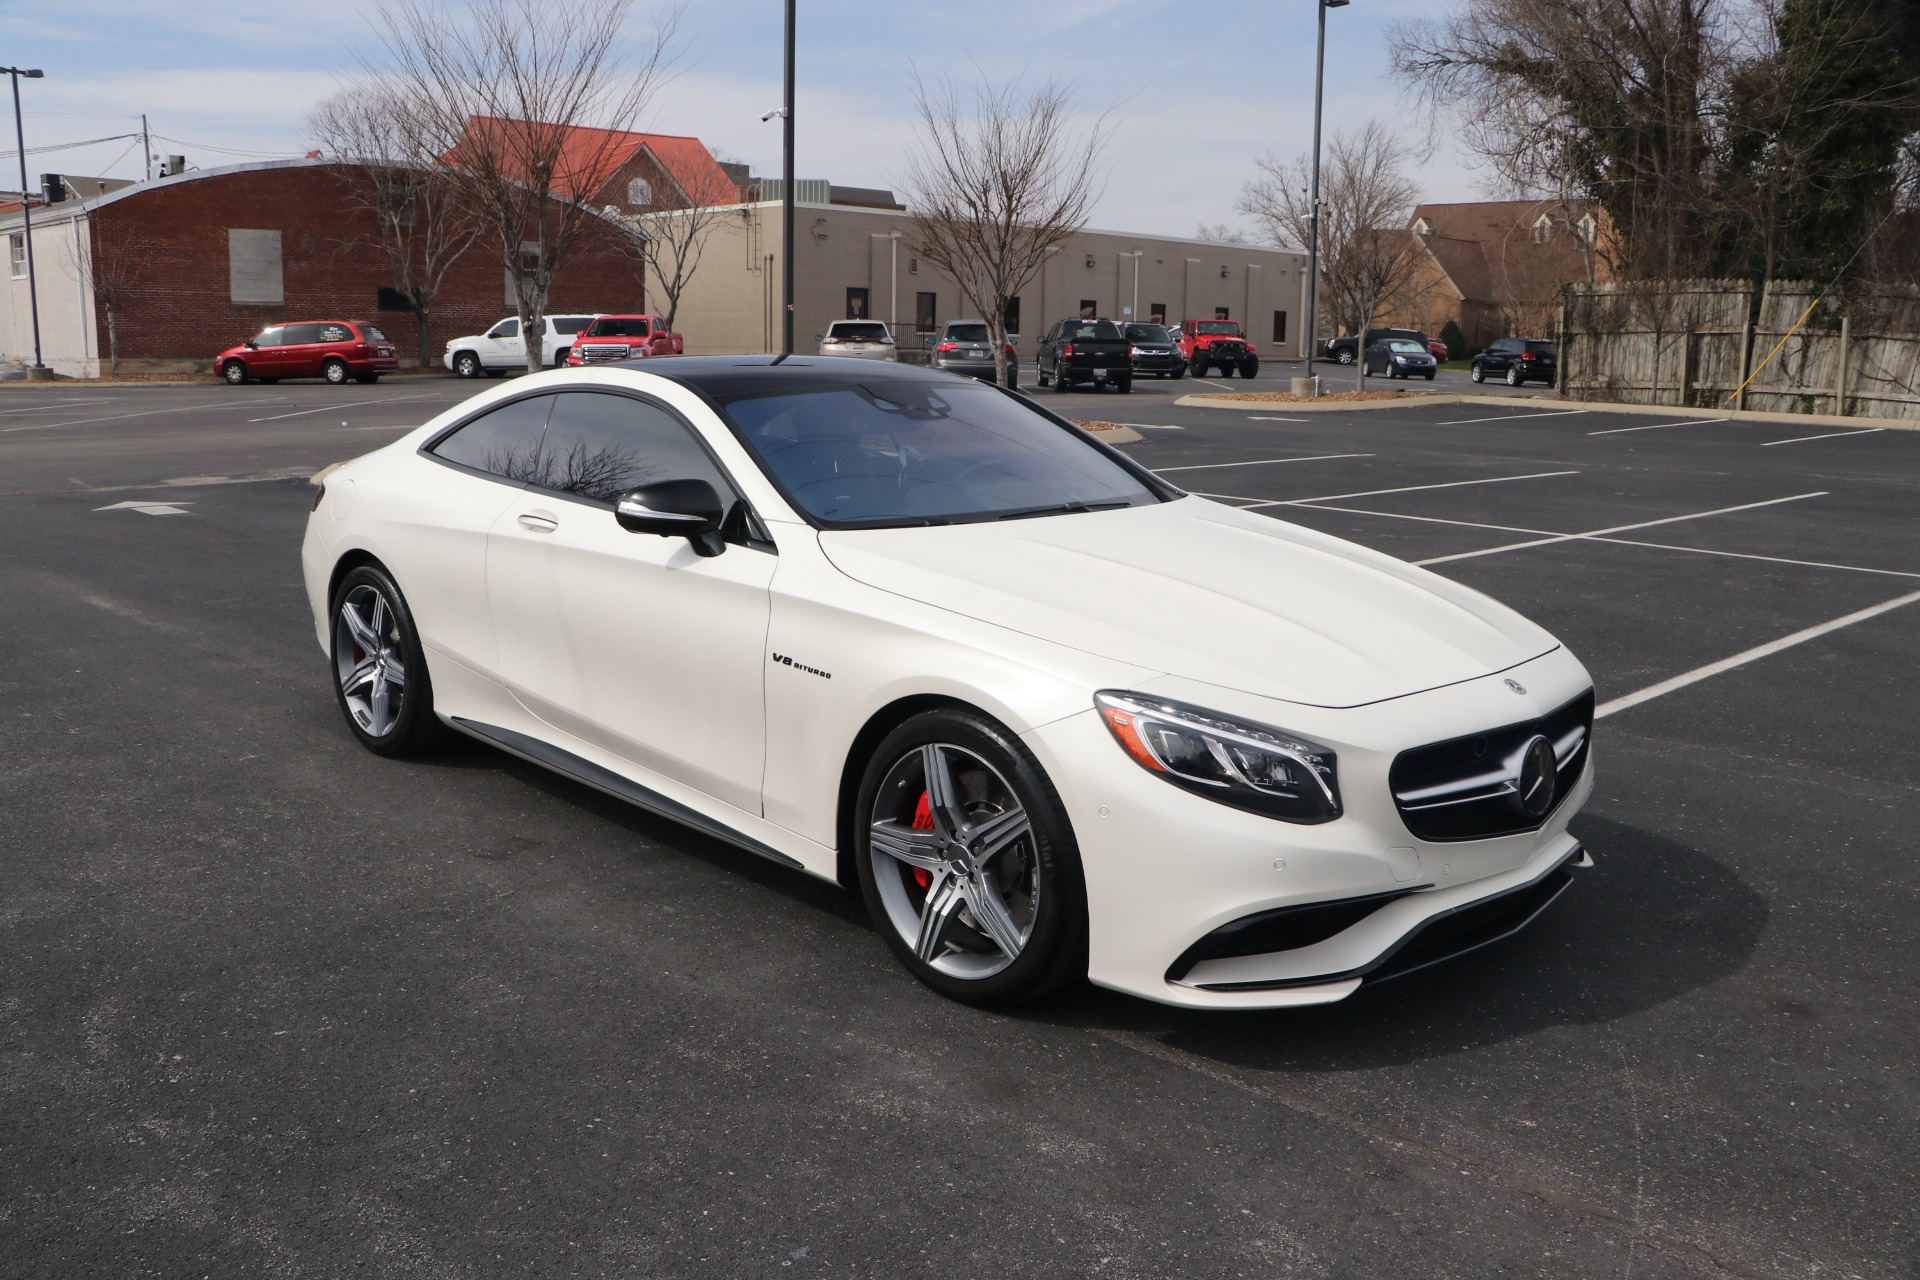 used-2017-mercedes-benz-s63-amg-coupe-awd-w-nav-for-sale-91-950